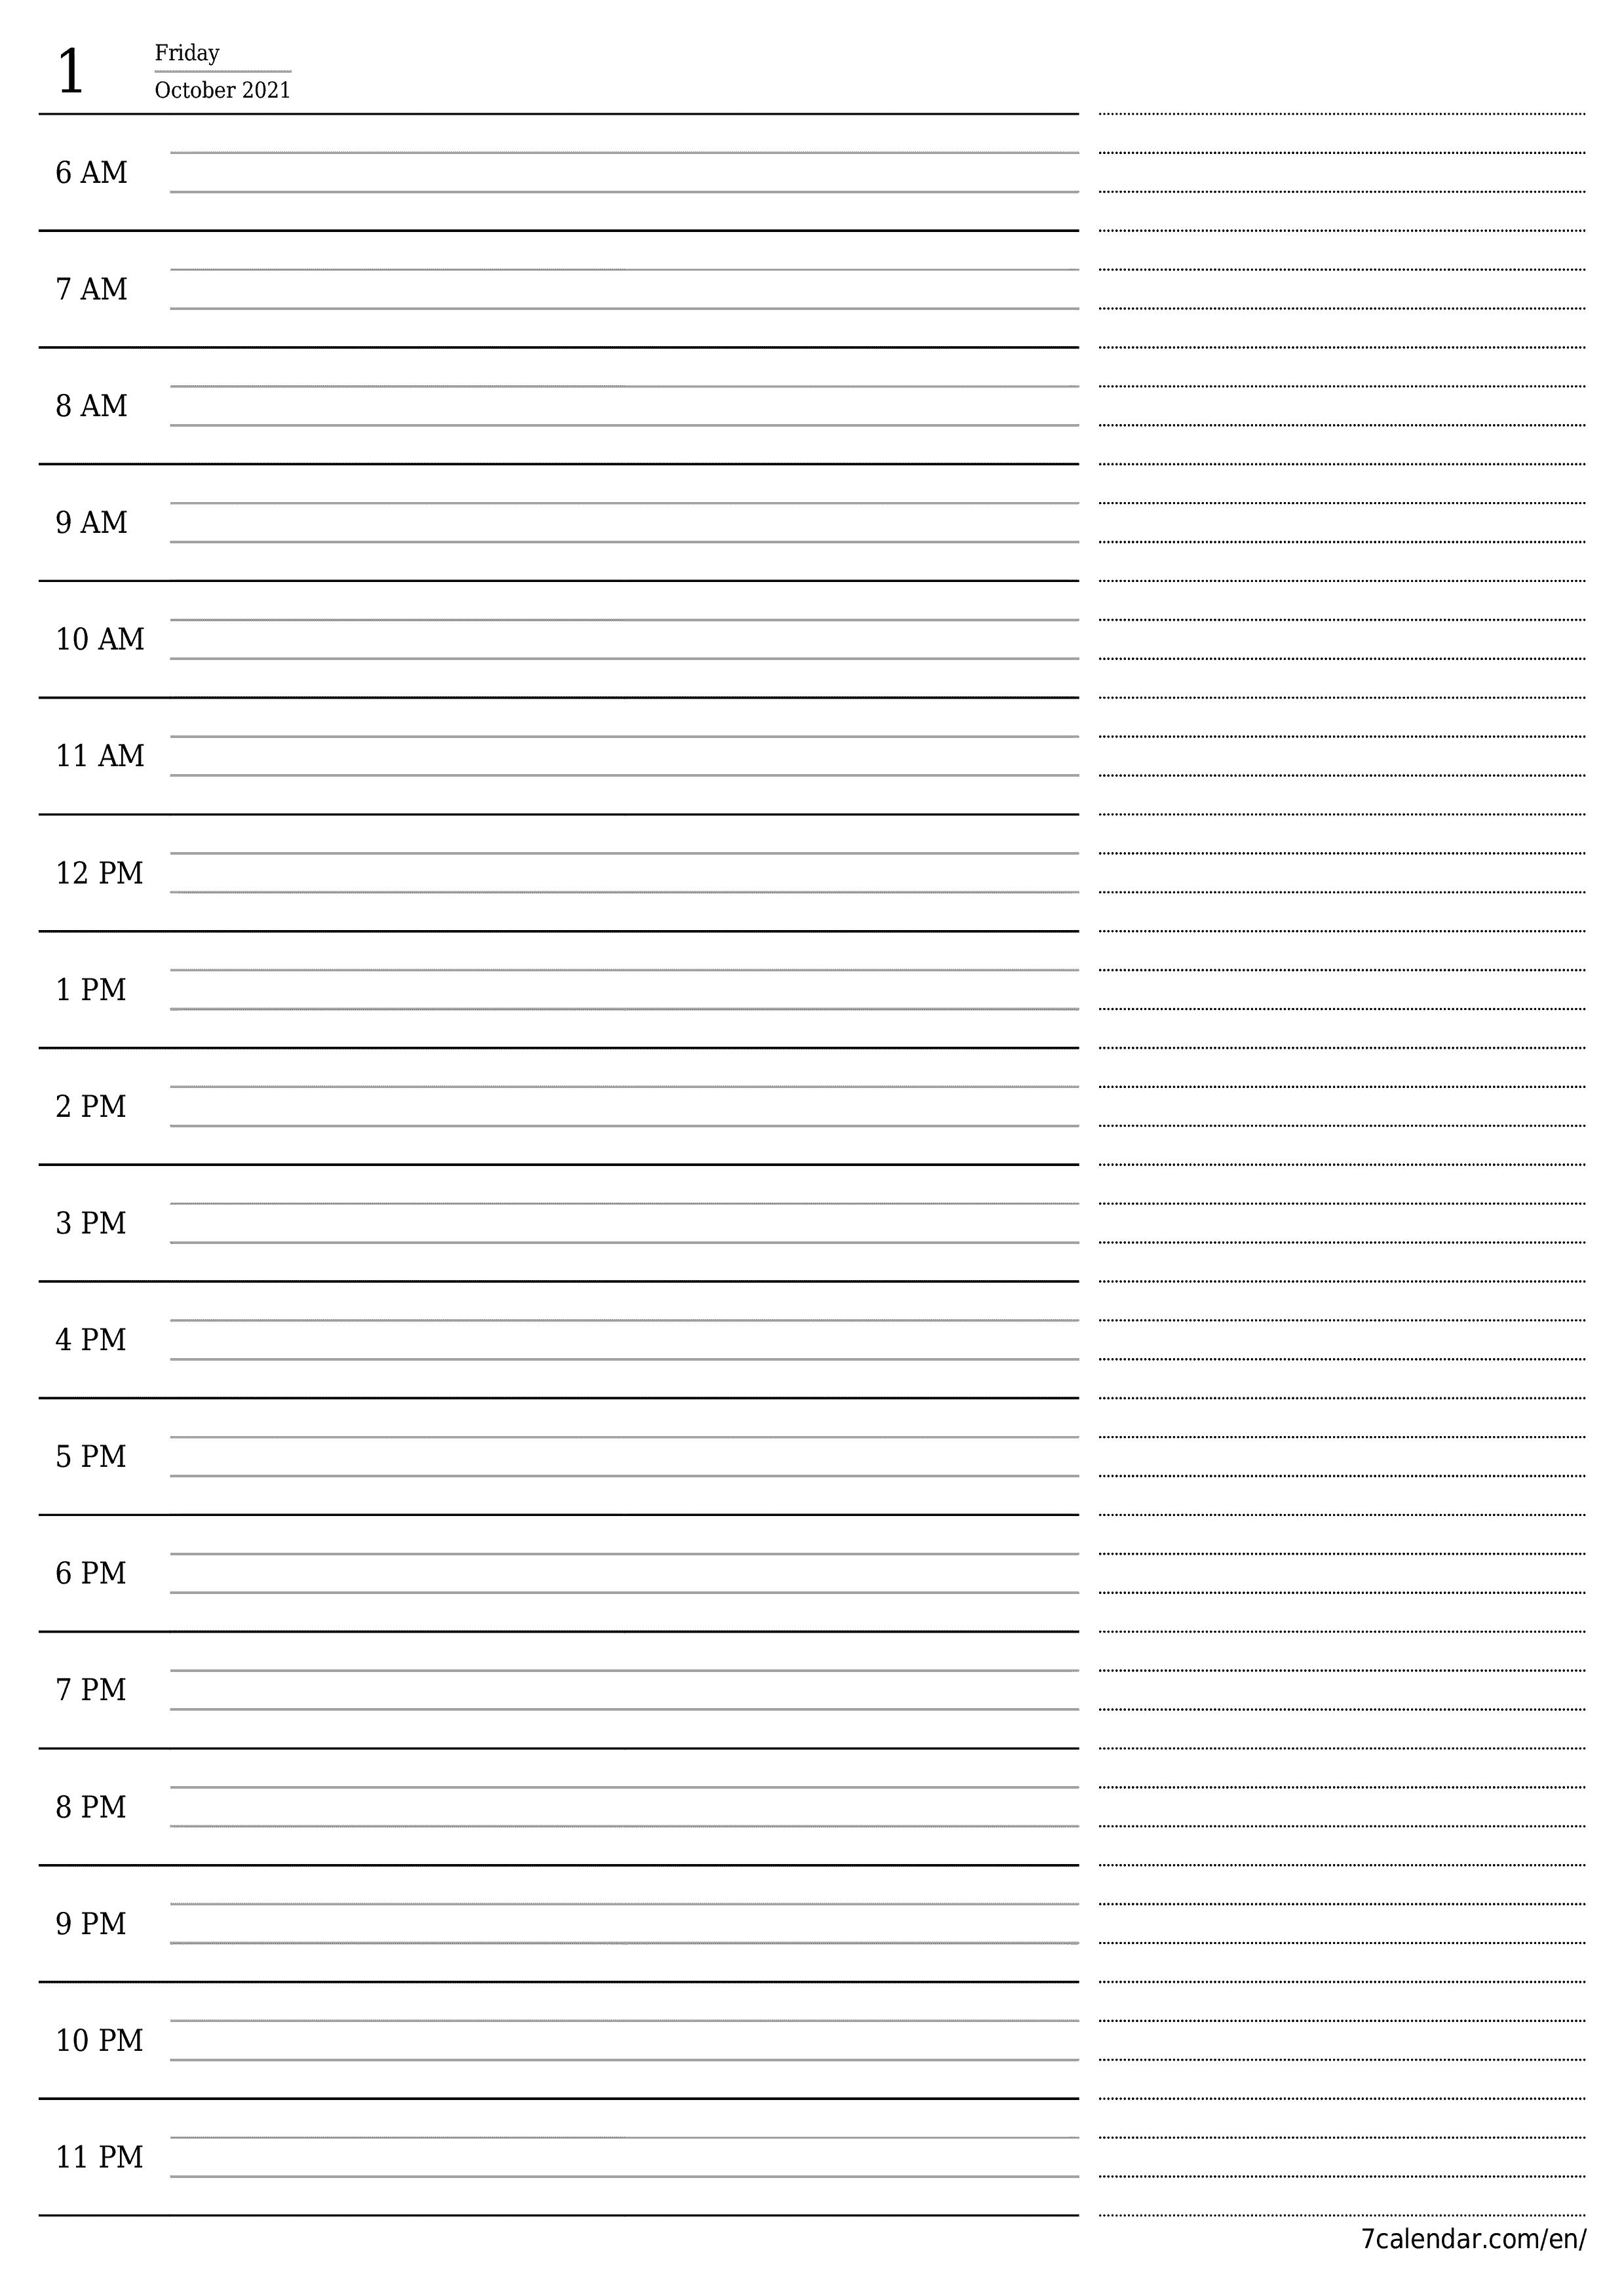 Blank daily printable calendar and planner for day October 2021 with notes, save and print to PDF PNG English - 7calendar.com